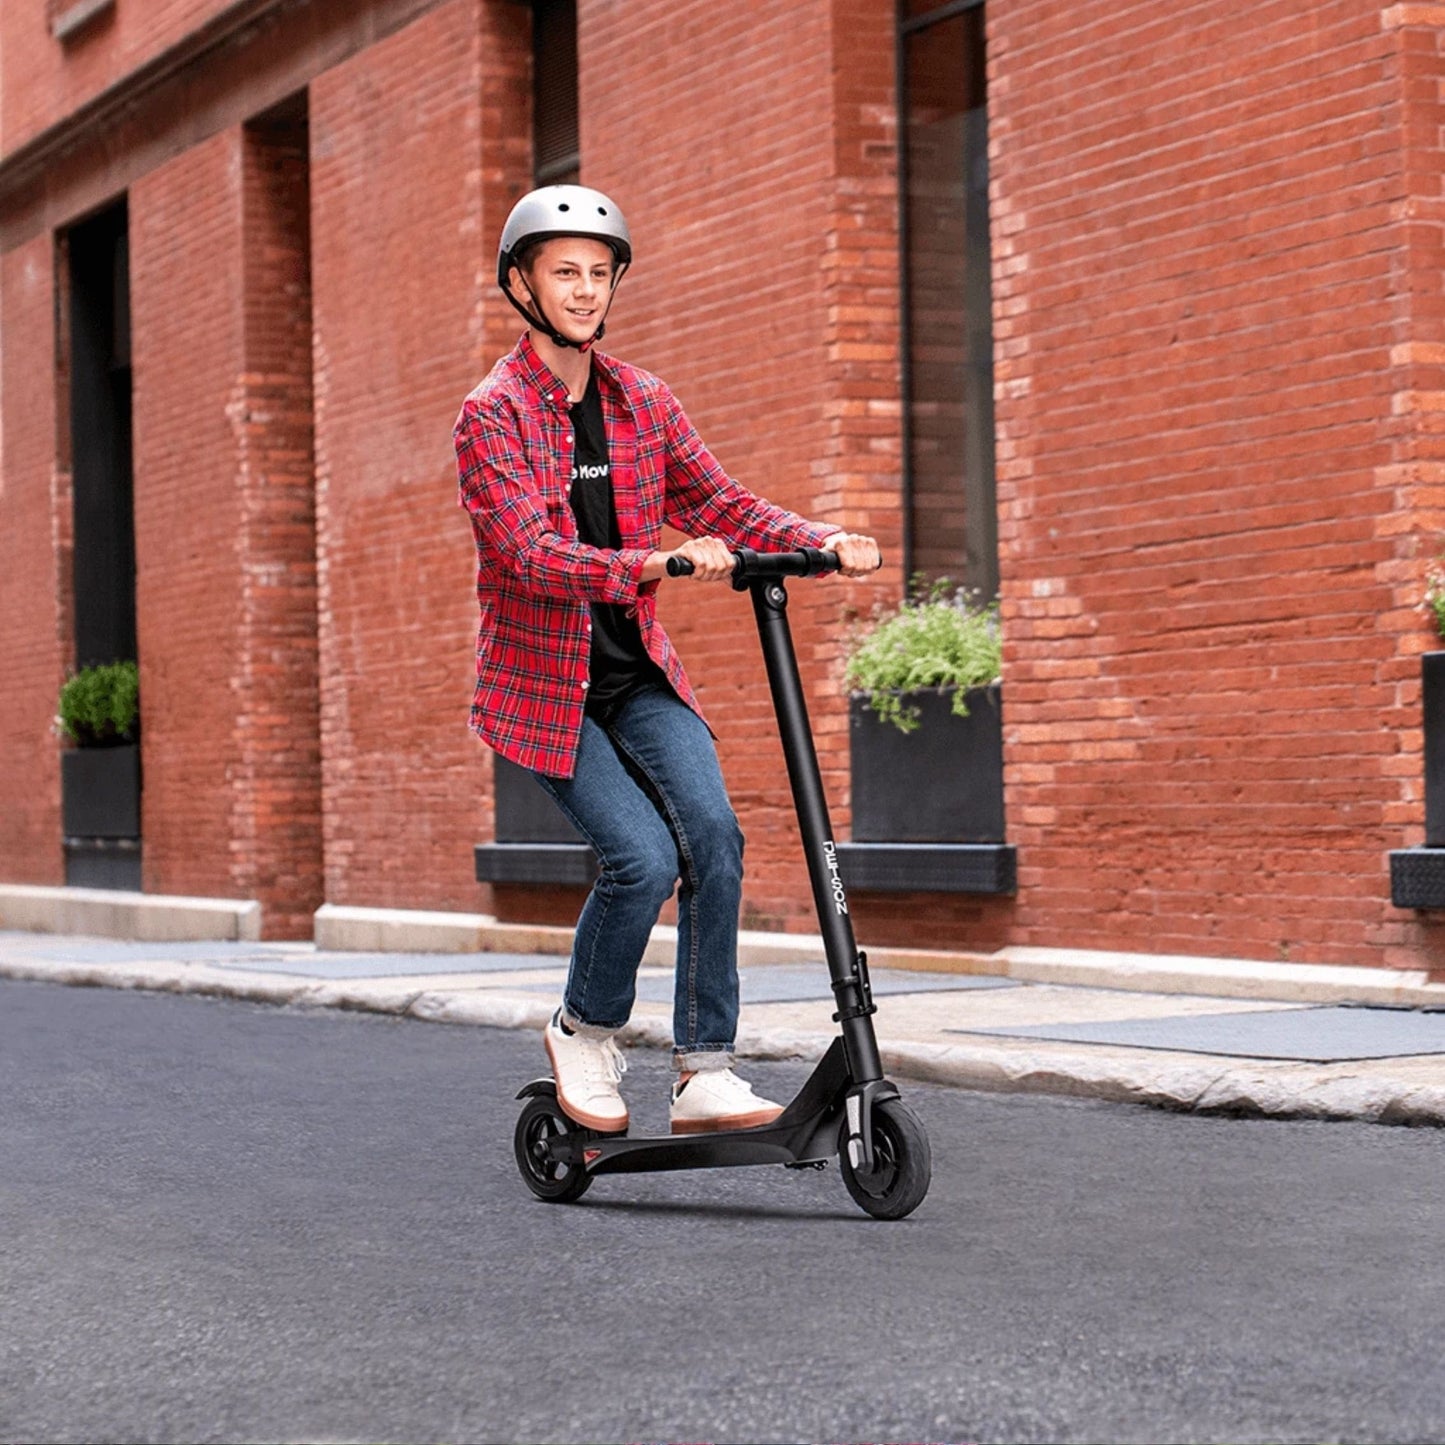 Jetson Element Pro Electric Scooter